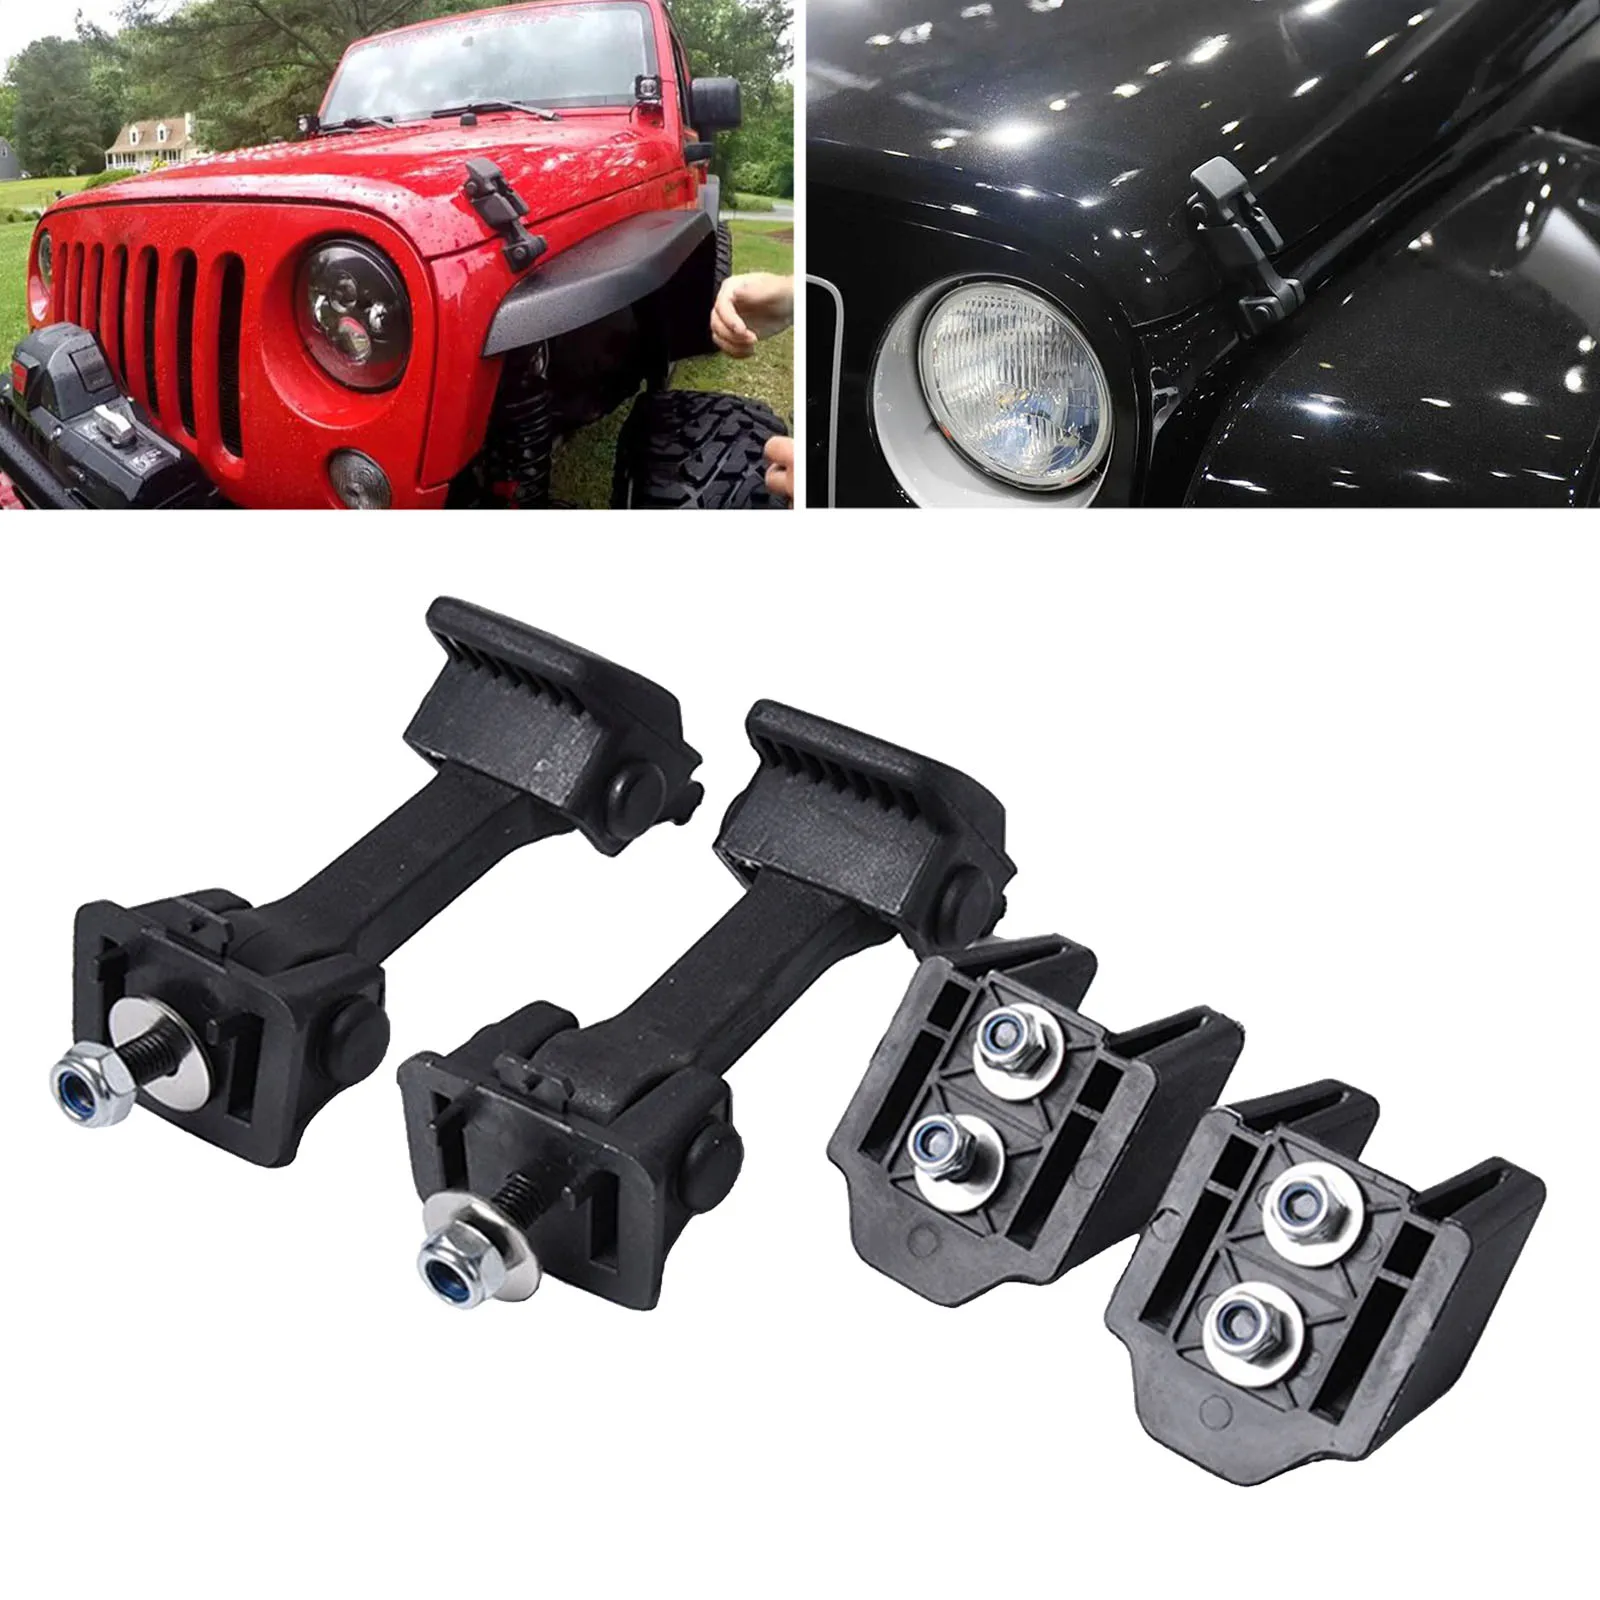 2 Set Hood Latches Catch Release Kit Locking Hood for Jeep for Wrangler for JK 2007-2016 Accessories Parts Black